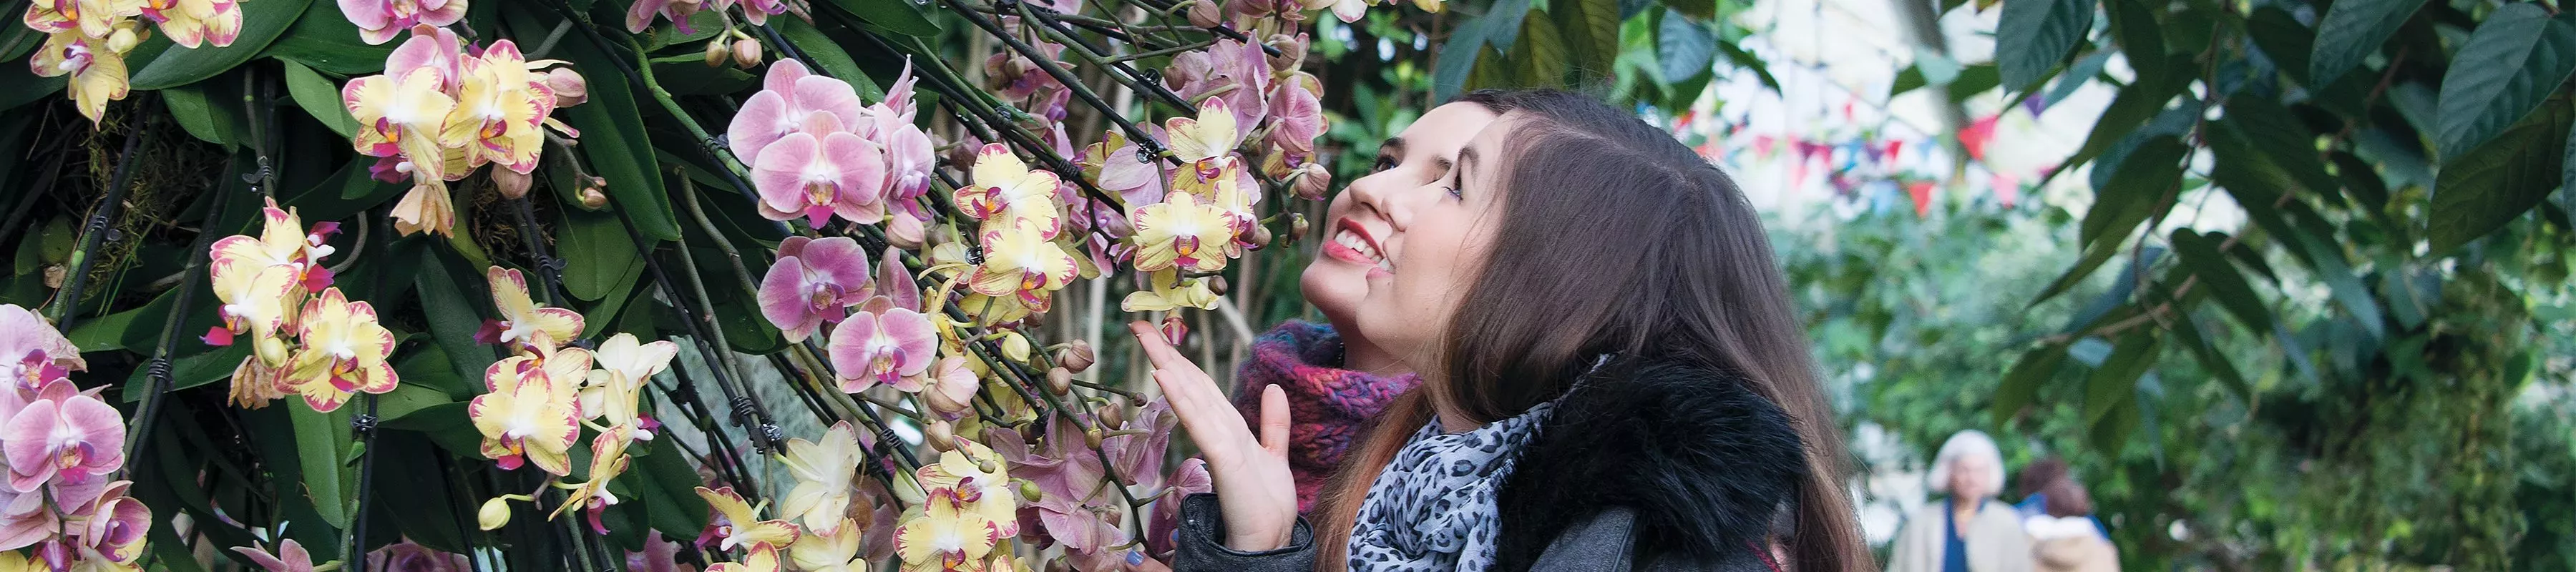 Two people examine a display of beautiful orchids